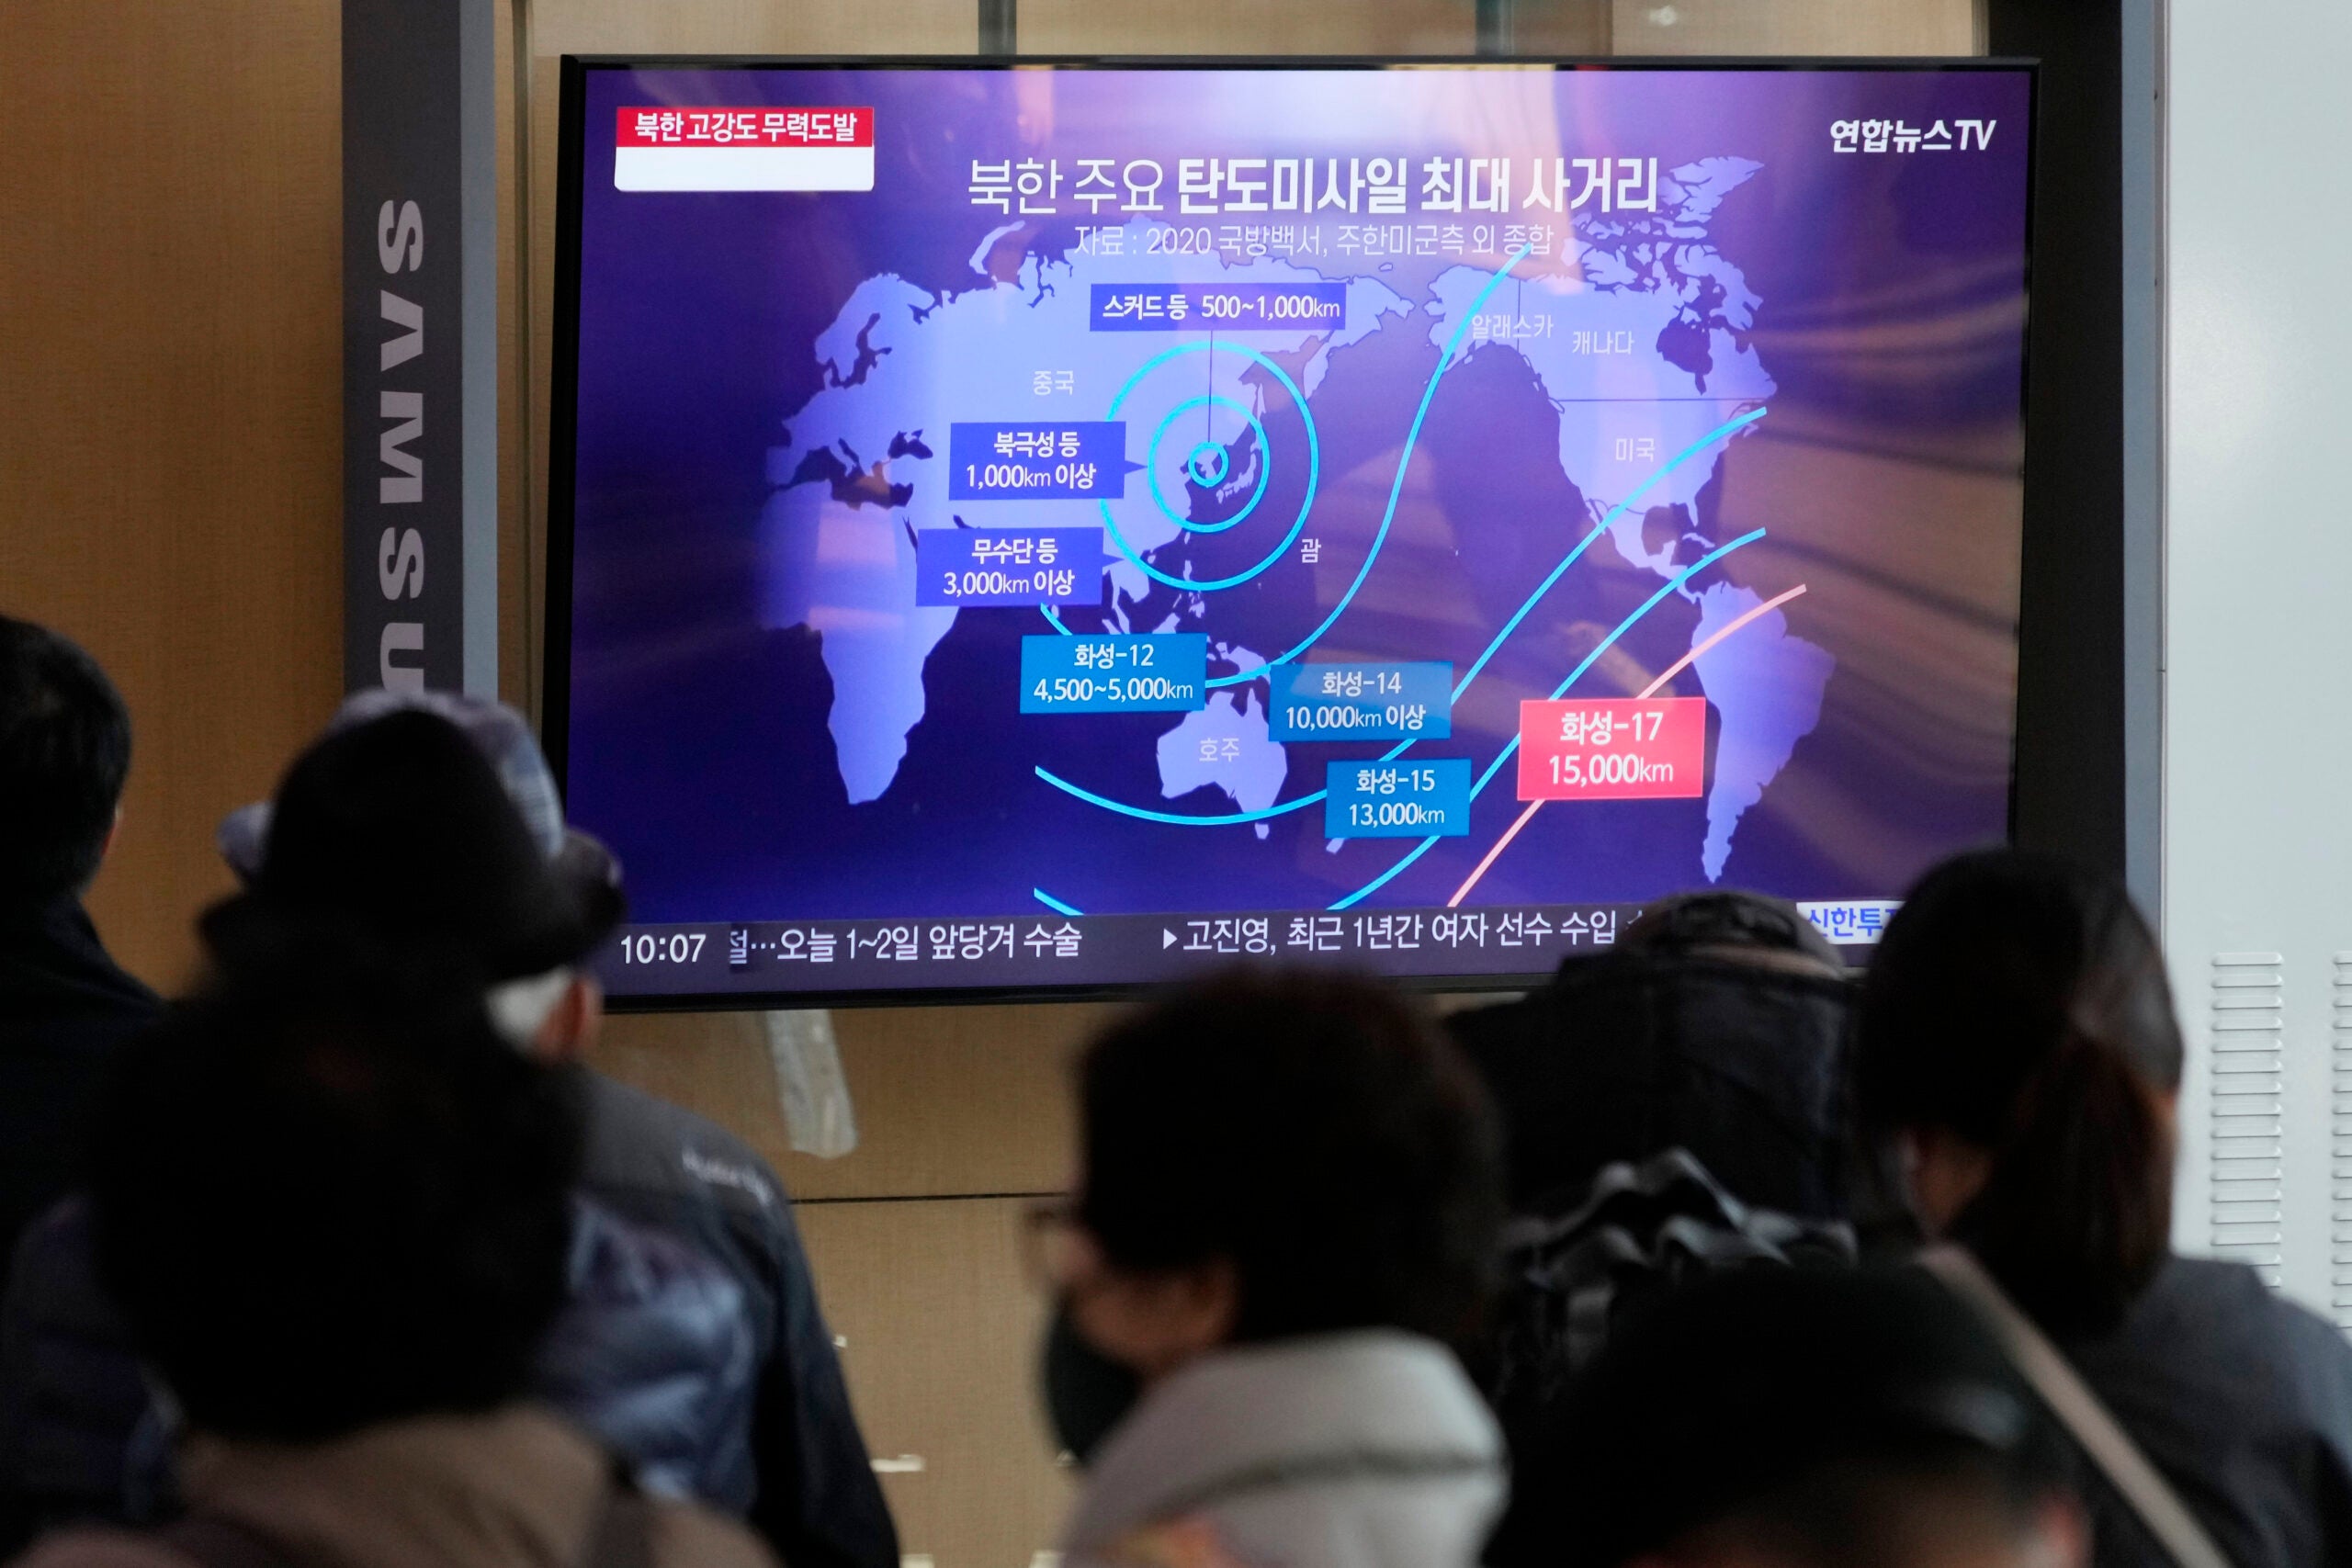 A TV screen showing a news program reporting on North Korea's missile launch at the Seoul Railway Station in Seoul, South Korea, Nov. 4, 2022. The sign reads "North Korea's main ballistic missile range." (AP Photo/Ahn Young-joon)